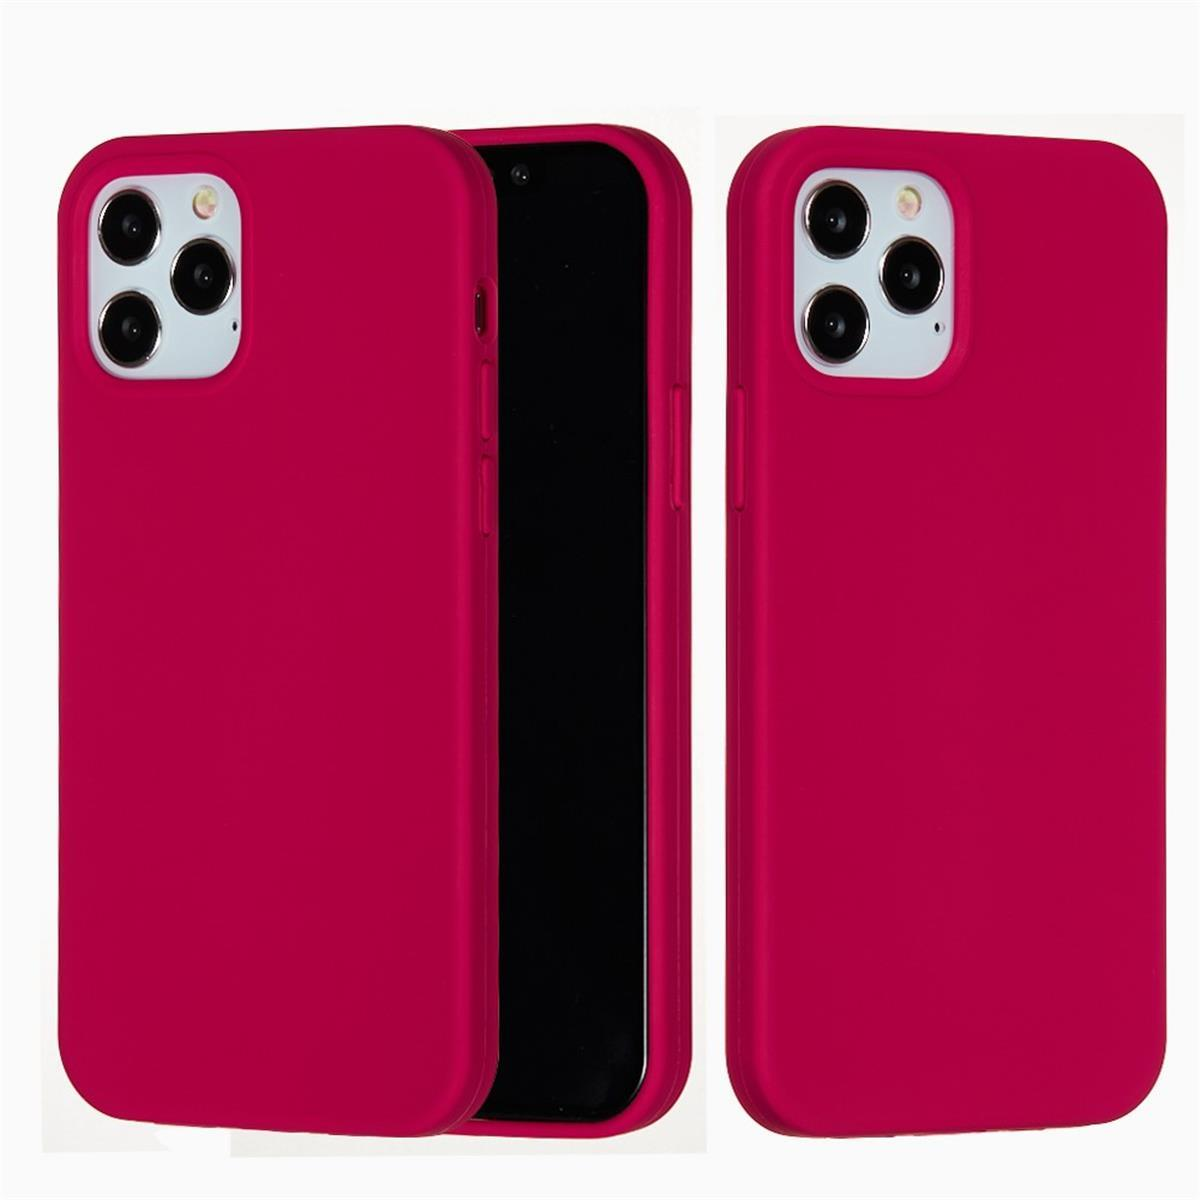 Backcover, Silikon, Pro Handycase iPhone Max Apple, COVERKINGZ Zoll], Rot aus 13 [6,7